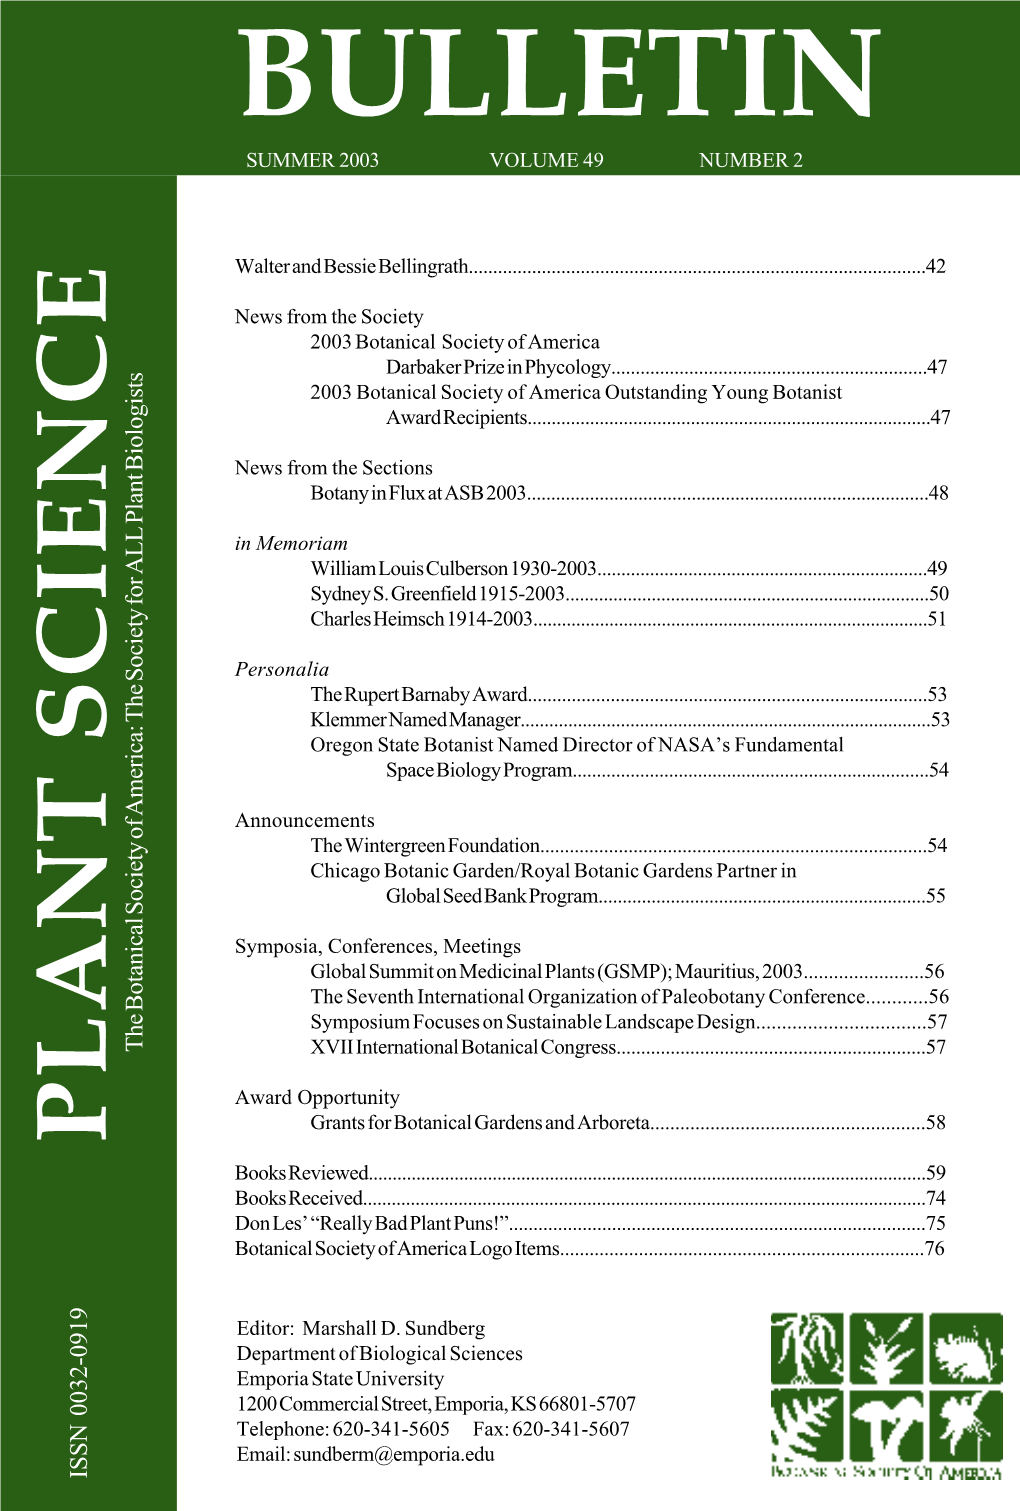 PLANT SCIENCE Books Reviewed